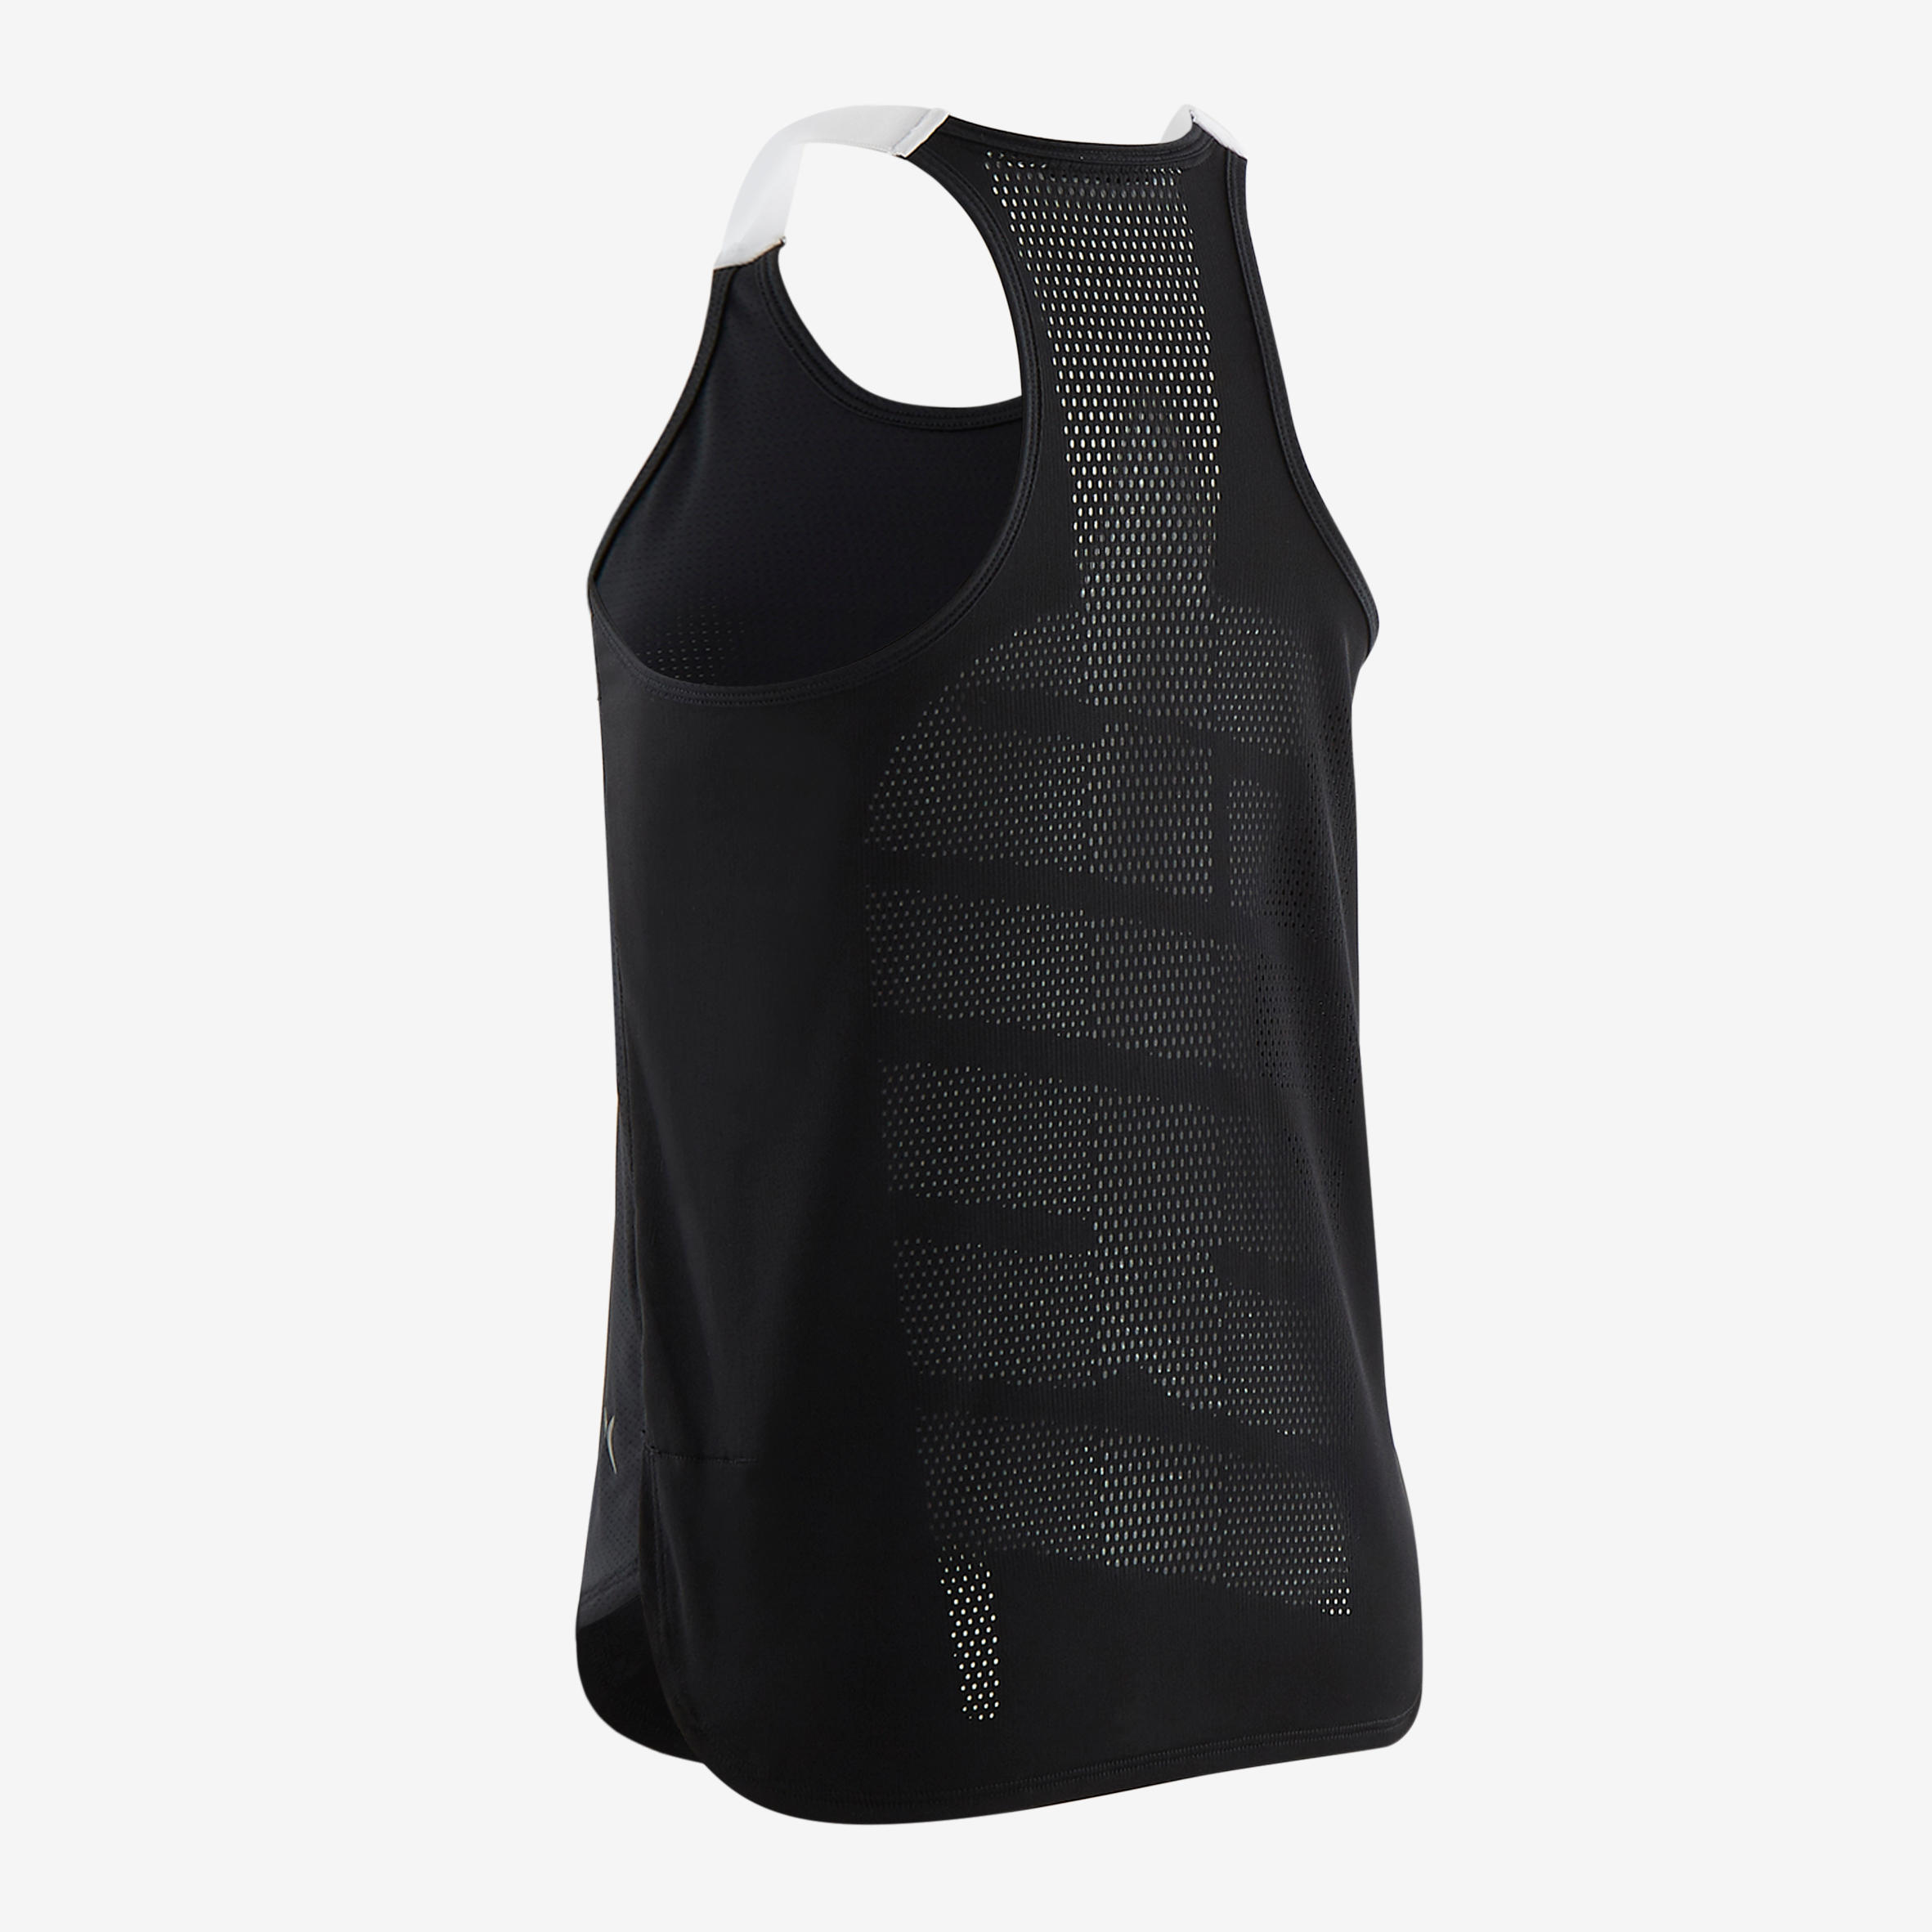 Girls' Technical Breathable Tank Top - Black/White 3/4